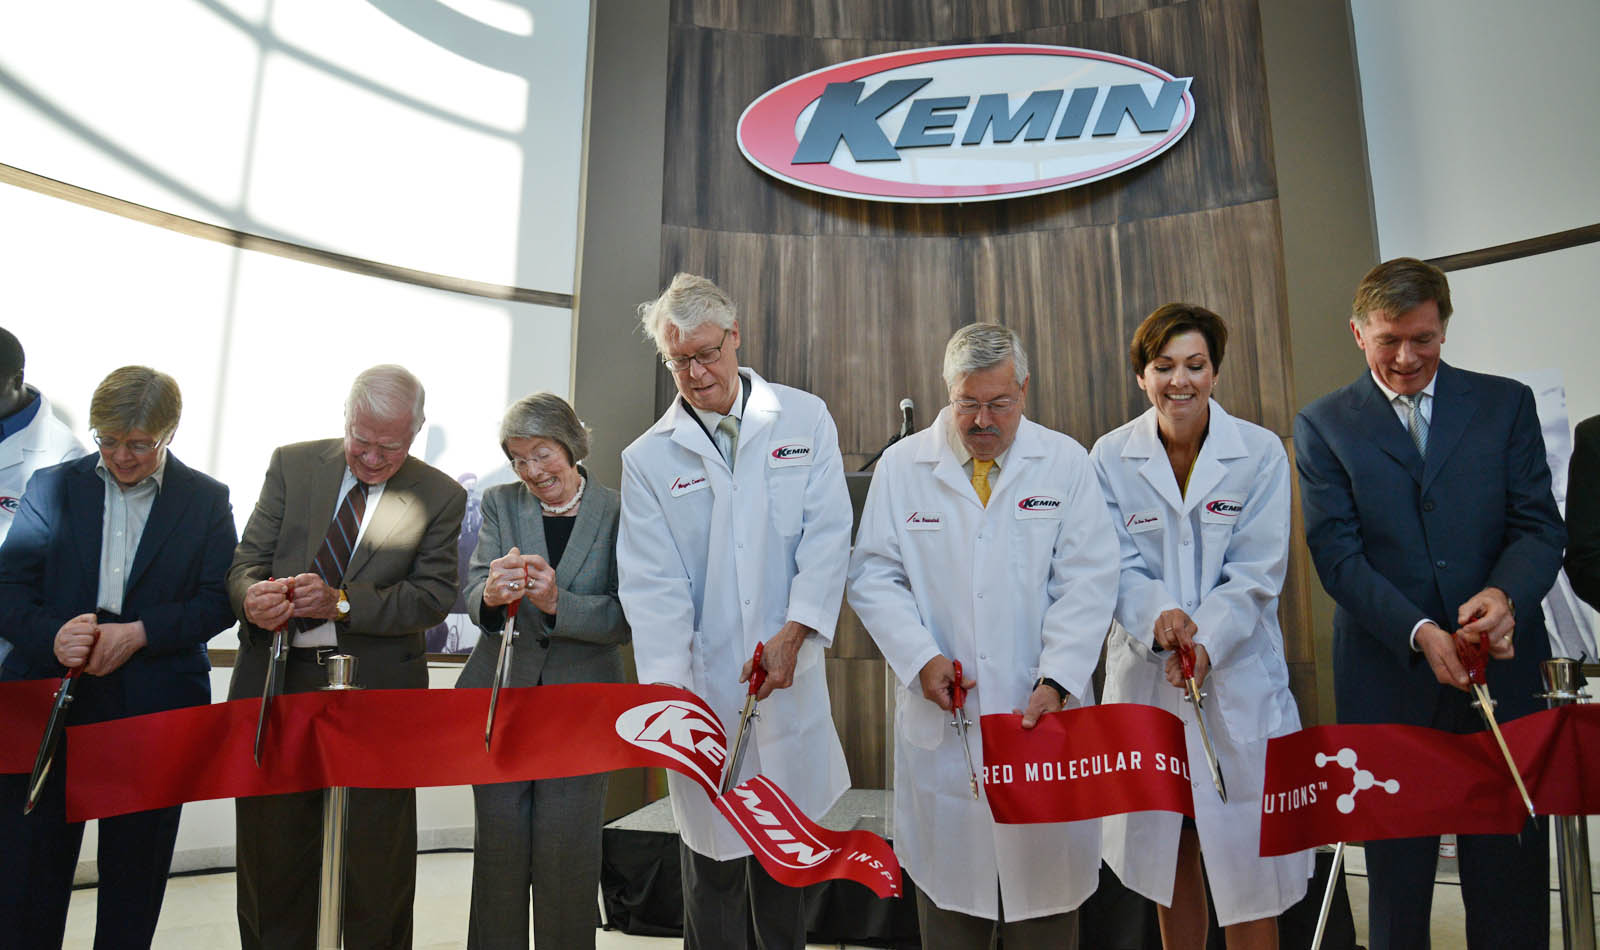 New Molecular Advancement Center Dedicated as Kemin Expansion Continues